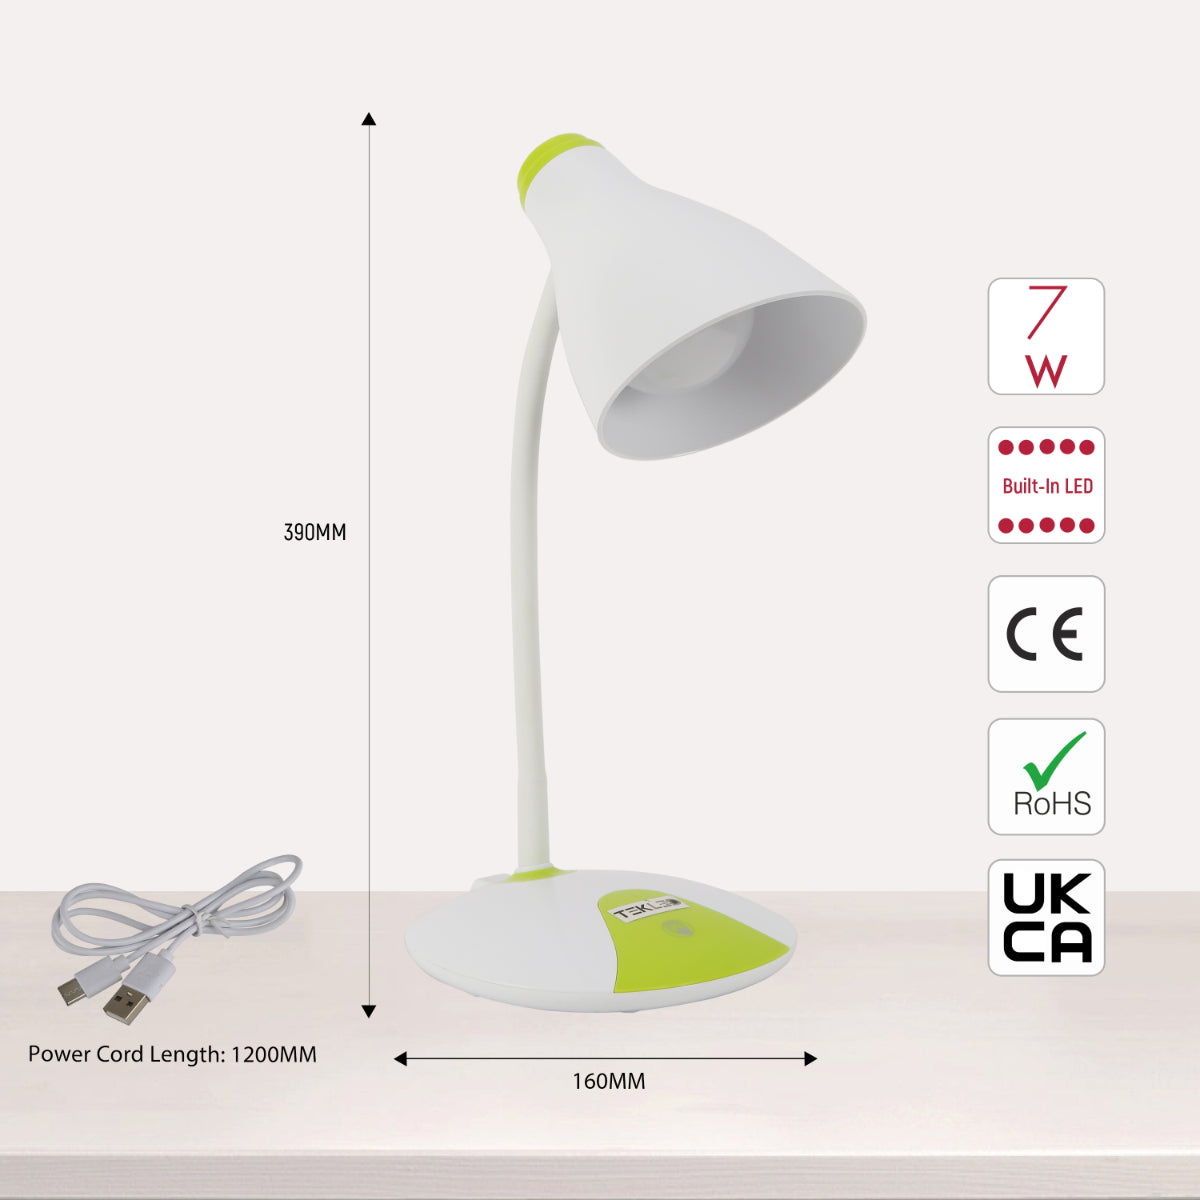 Size and certifications of Adjustable Gooseneck LED Desk Lamp with Dual Colour Design 130-03757